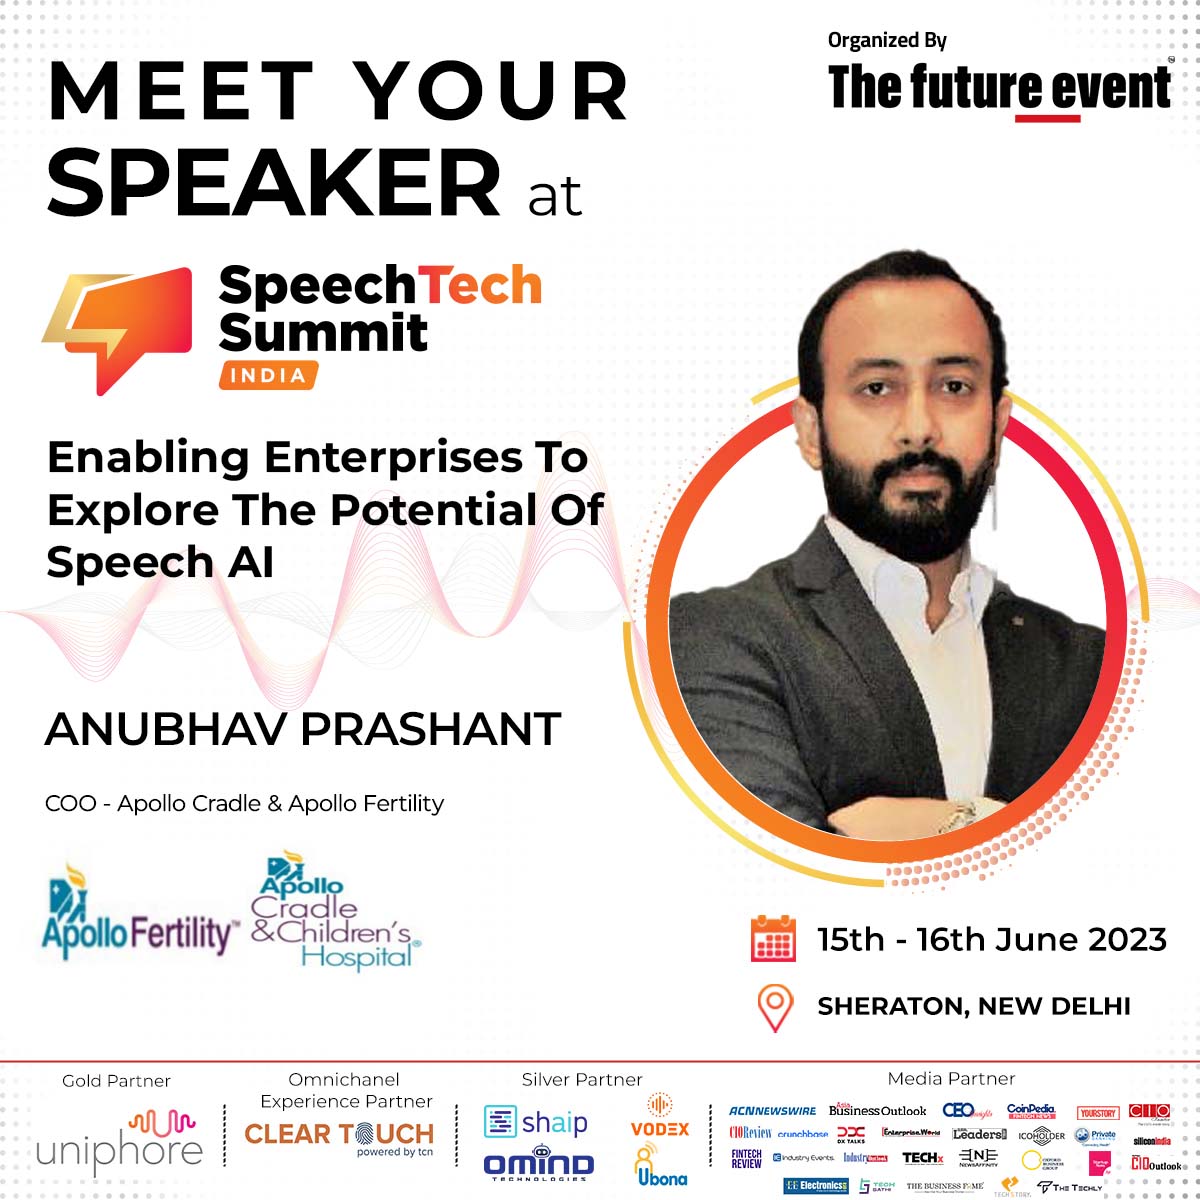 Introducing Anubhav Prashant, COO at @ApolloCradle & @ApolloFertility, as a Speaker for India's Only Speech technology-focused Summit.
Join us for the same, organised by @TheFutureEvent1, visit: speechtechsummit.com

#thefutureevent #speechtechsummit #stsindia
#b2b #AI